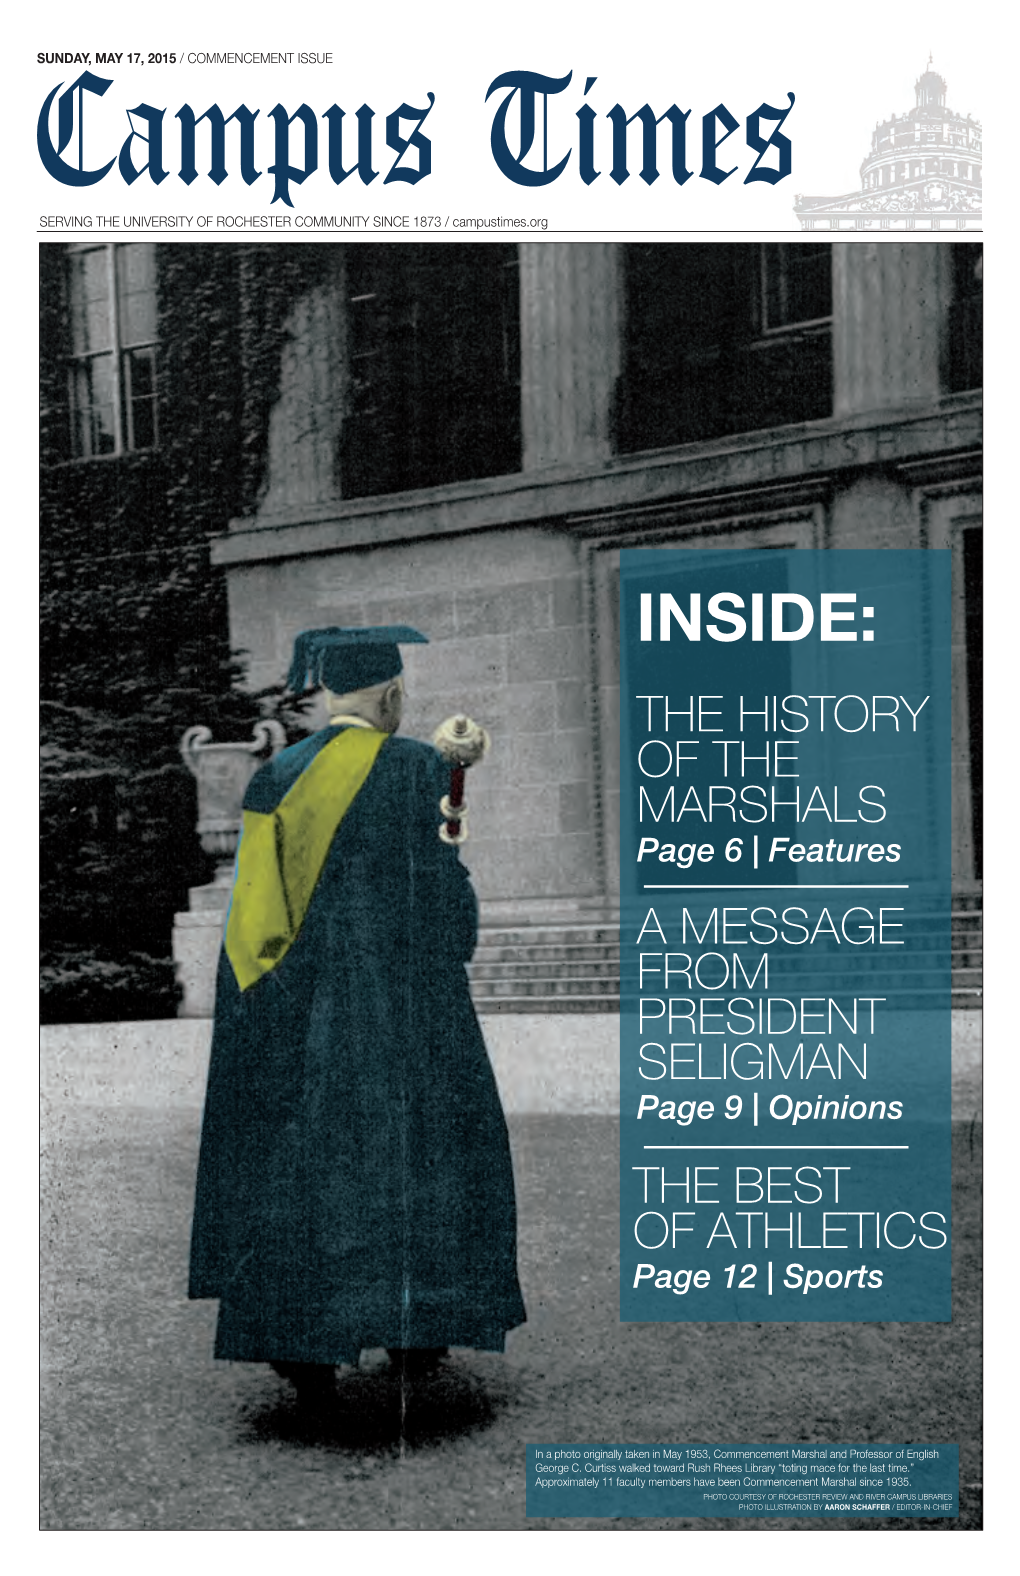 INSIDE: the HISTORY of the MARSHALS Page 6 | Features a MESSAGE from PRESIDENT SELIGMAN Page 9 | Opinions the BEST of ATHLETICS Page 12 | Sports